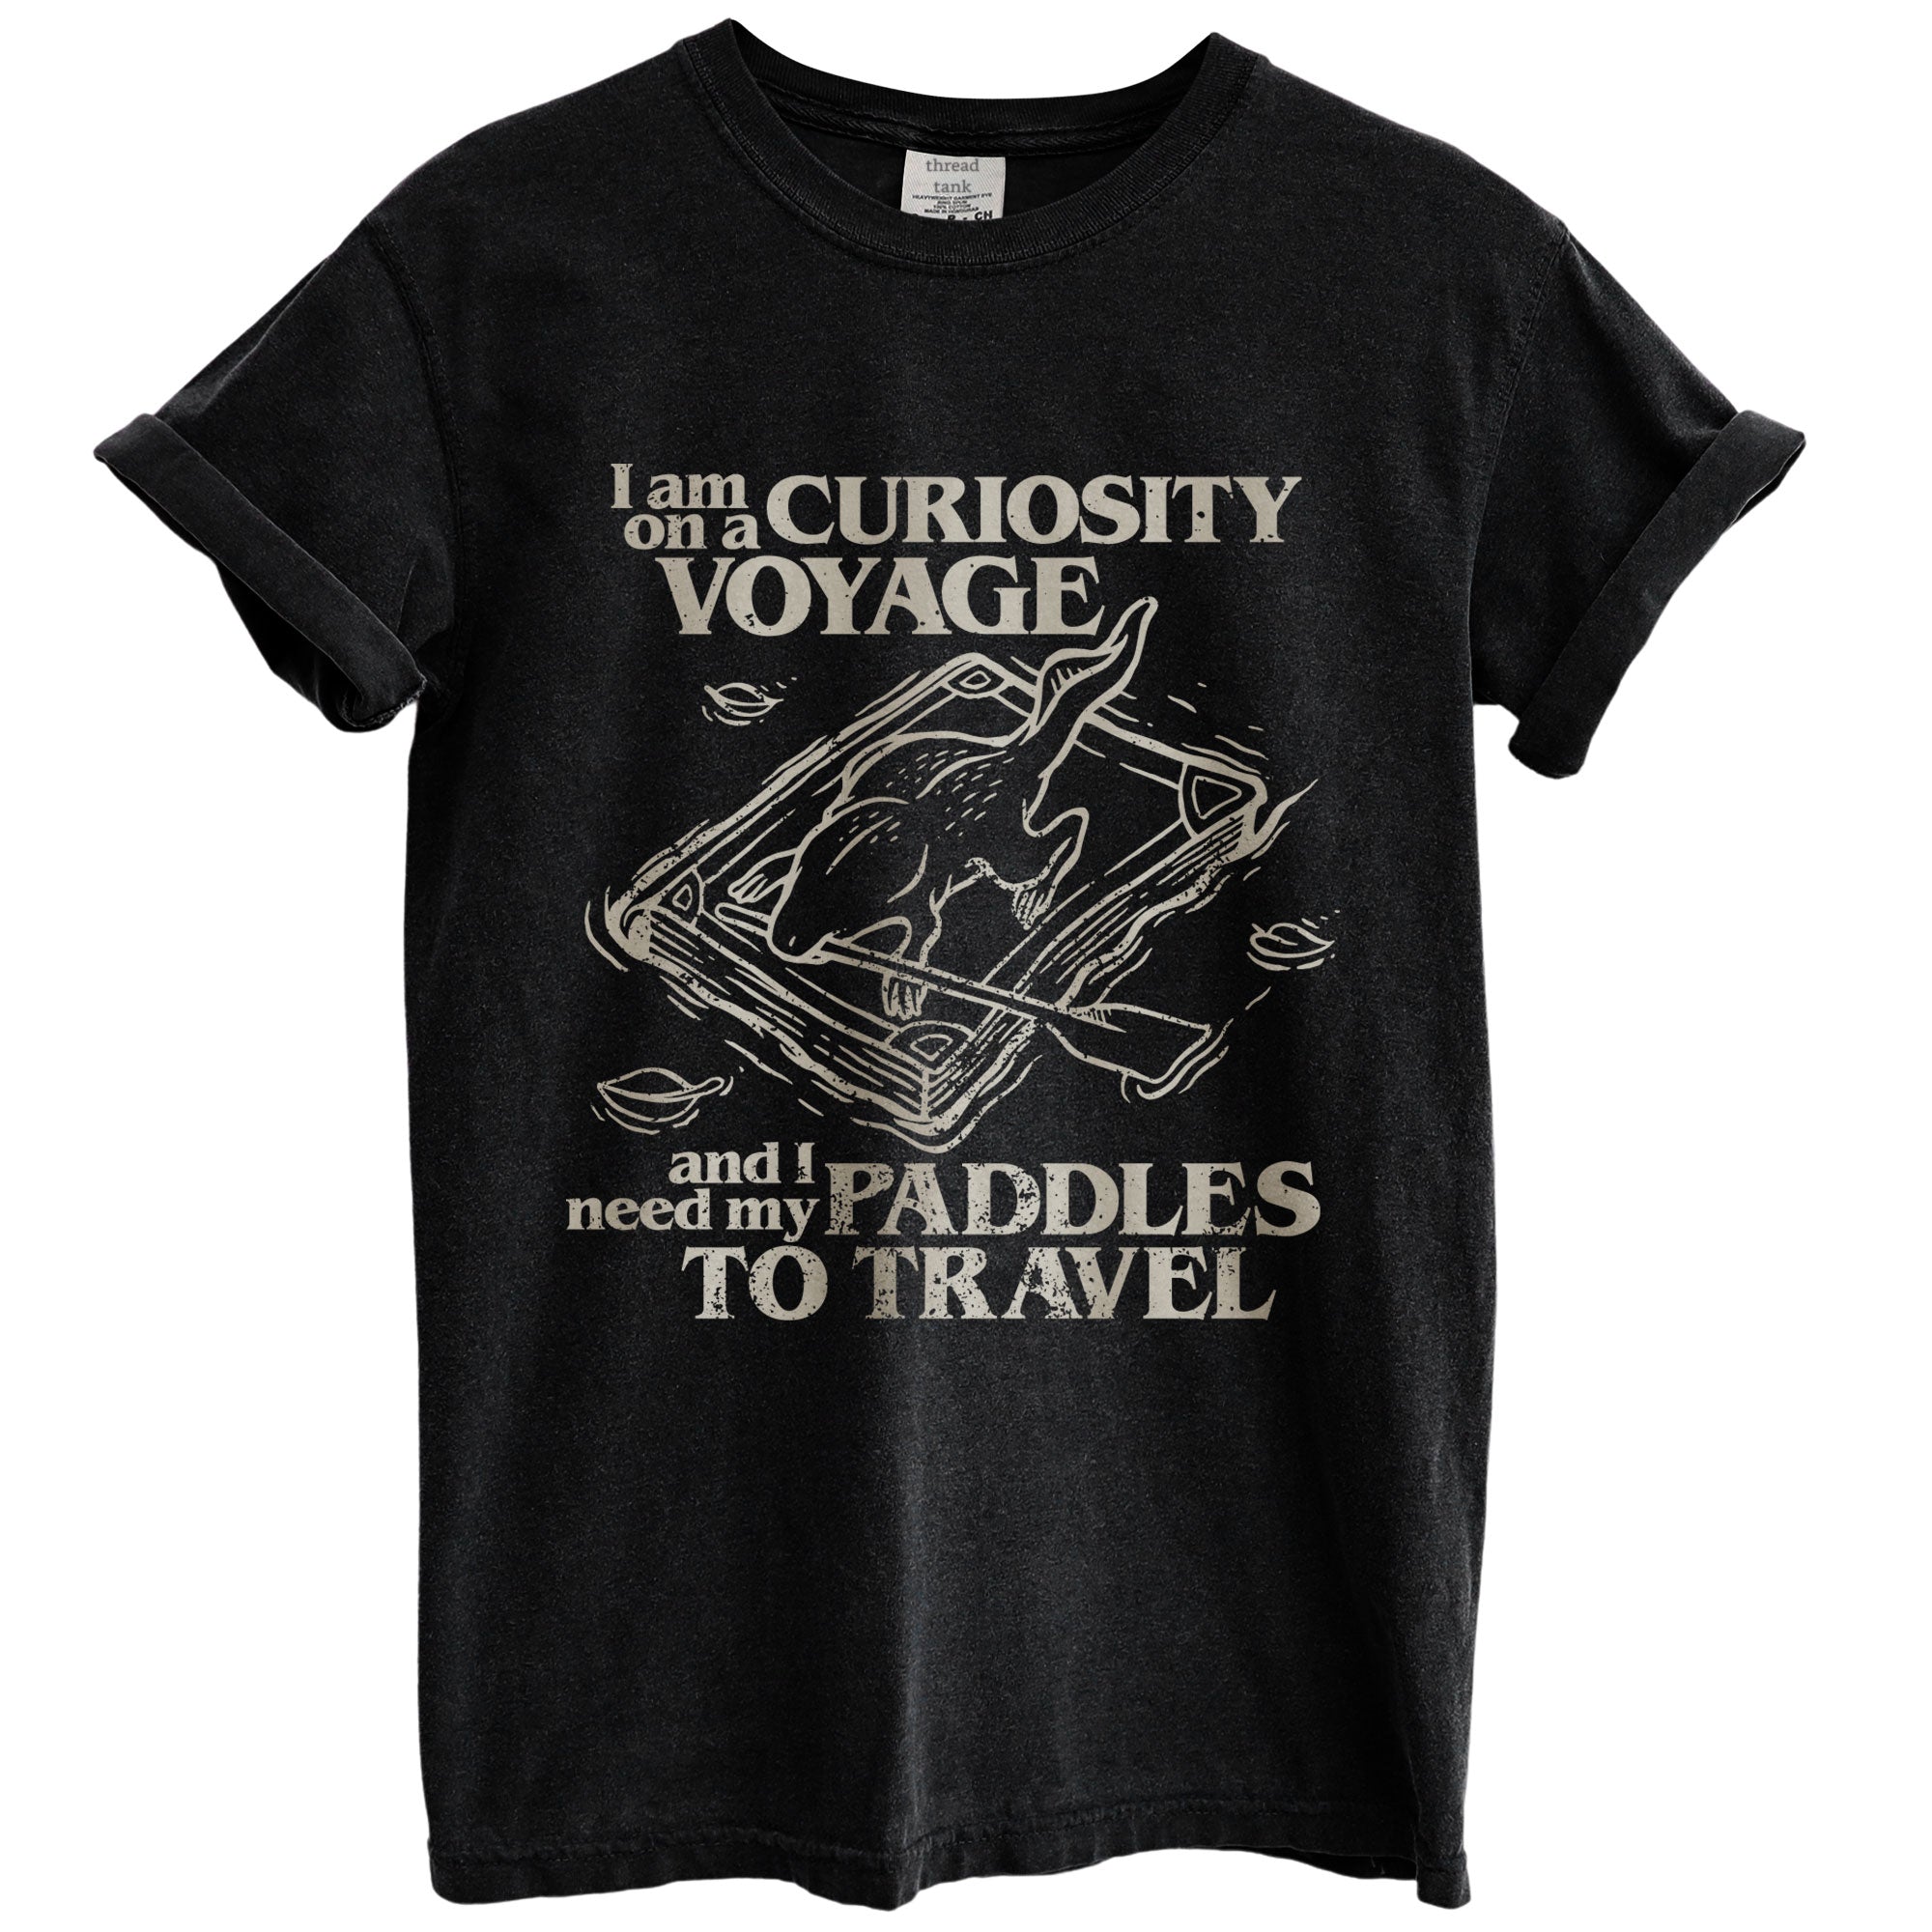 i am on a curiosity voyage and i need my paddles to travel oversized garment dyed shirt